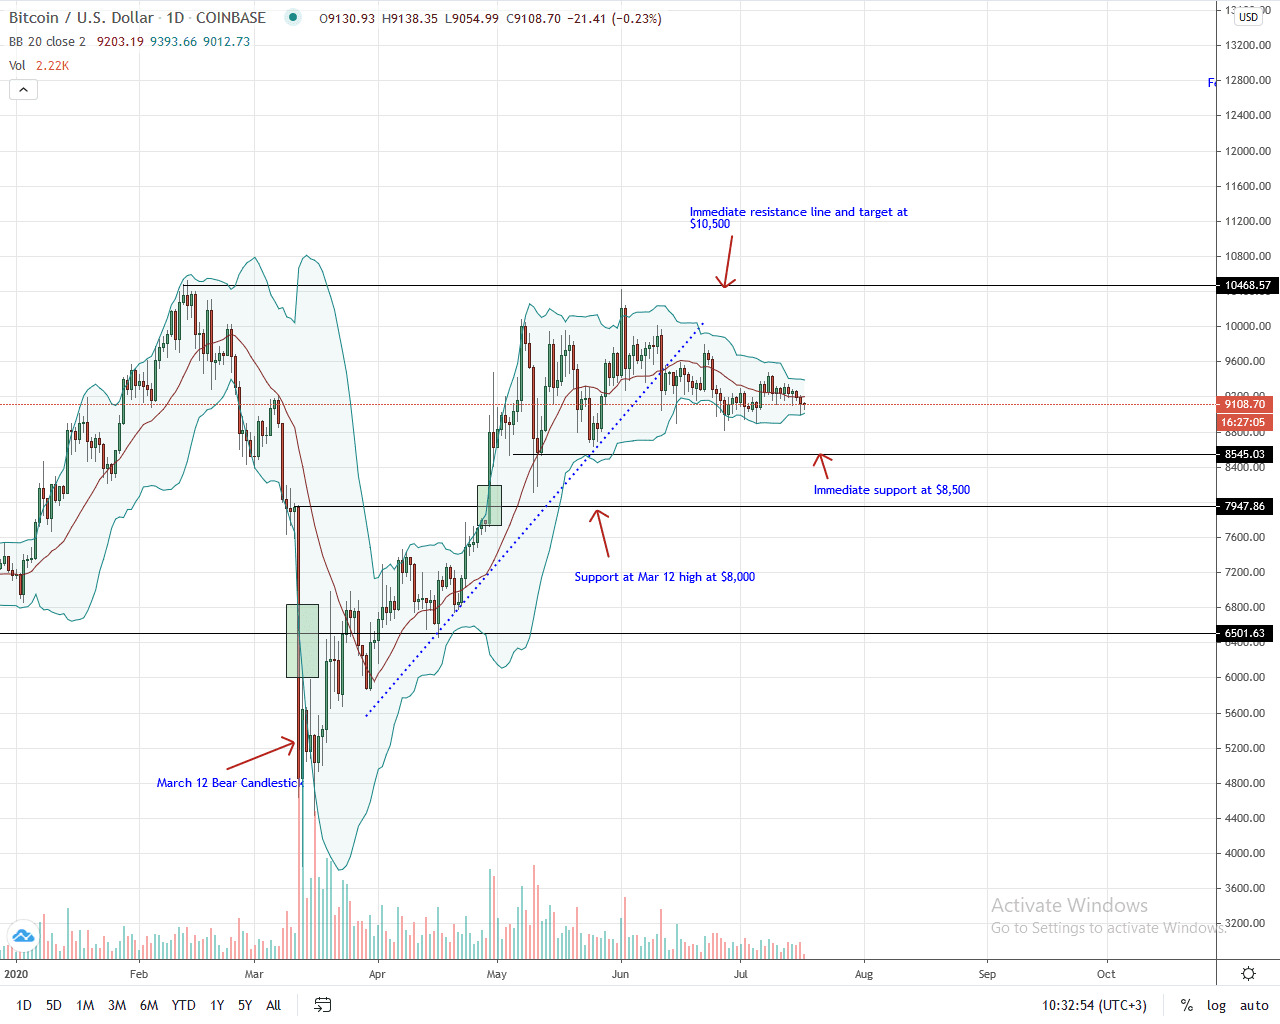 Bitcoin Daily Chart for July 17, 2020